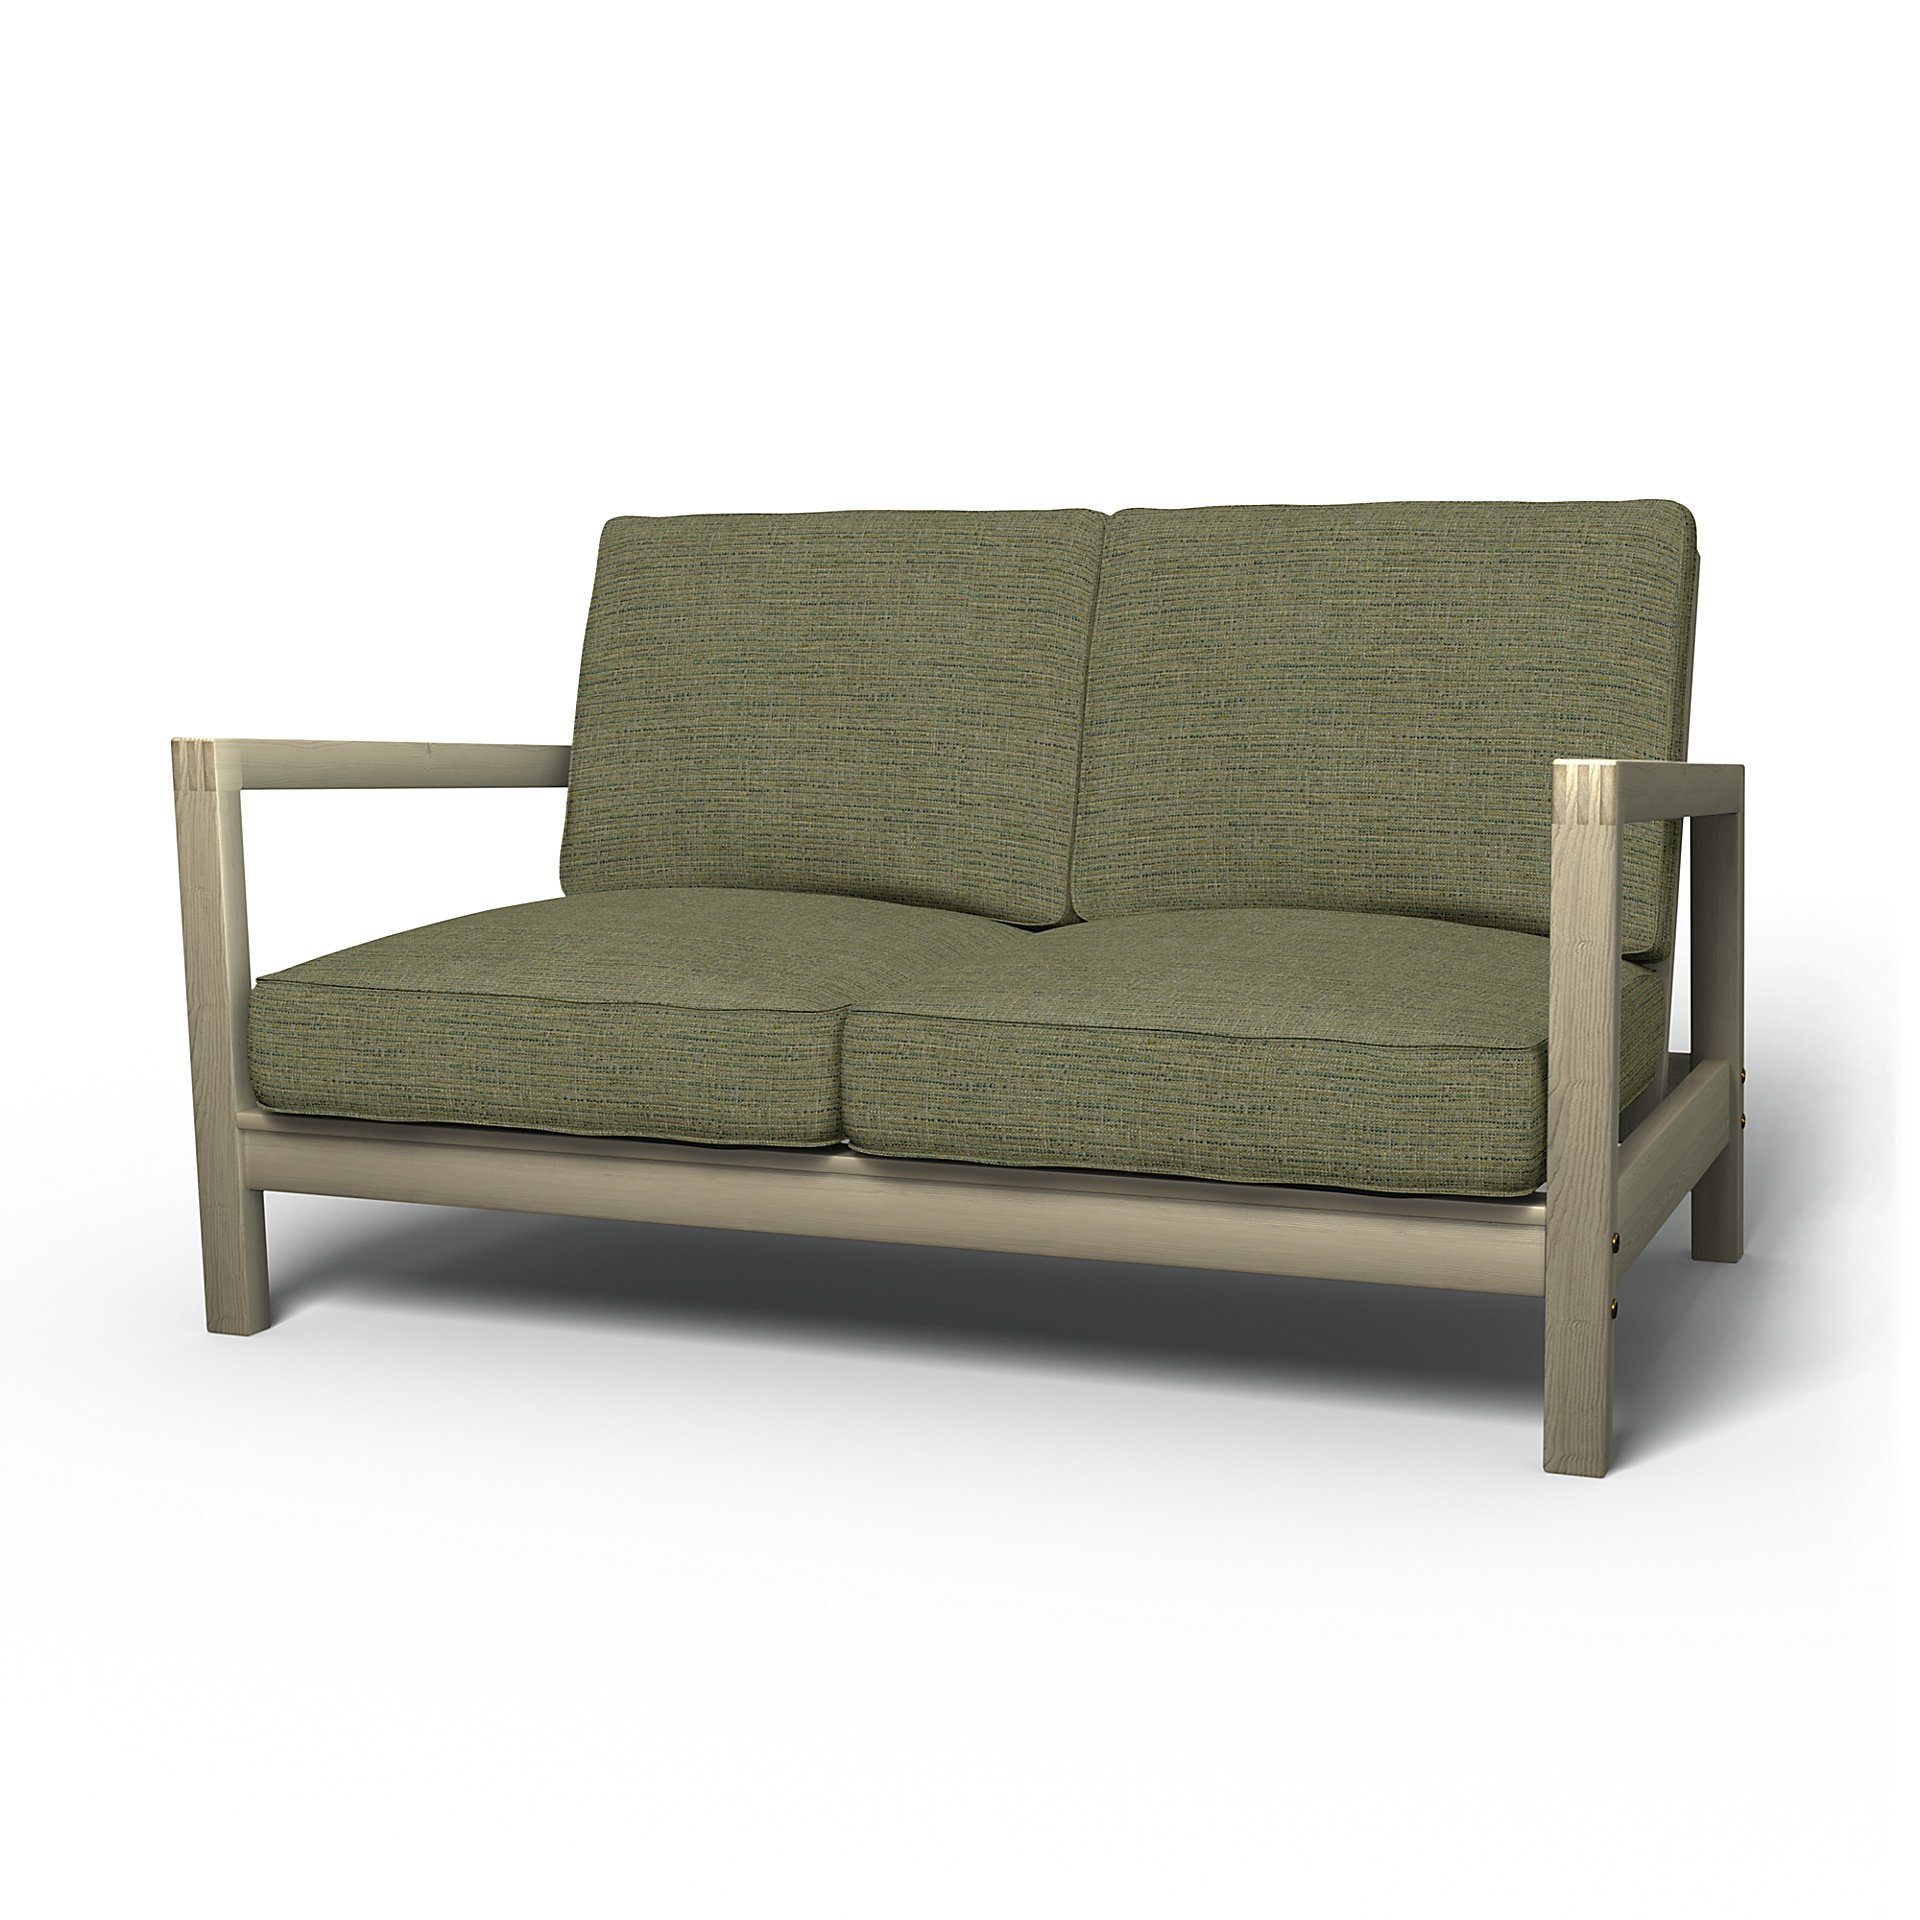 IKEA - Lillberg 2 Seater Sofa Cover, Meadow Green, Boucle & Texture - Bemz